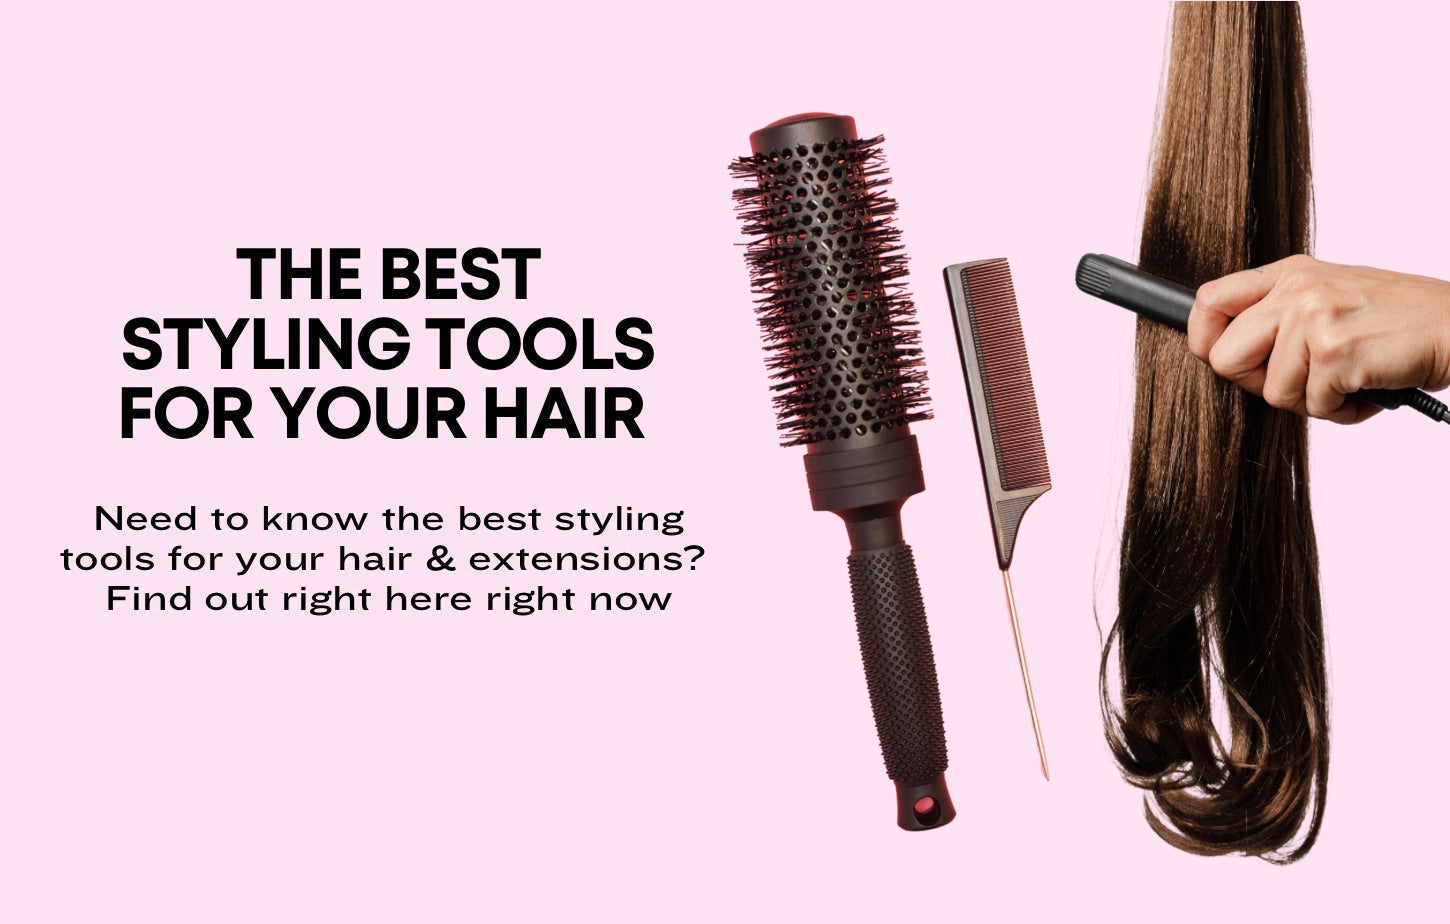 The Best Hair & Hair Extension Styling Tools